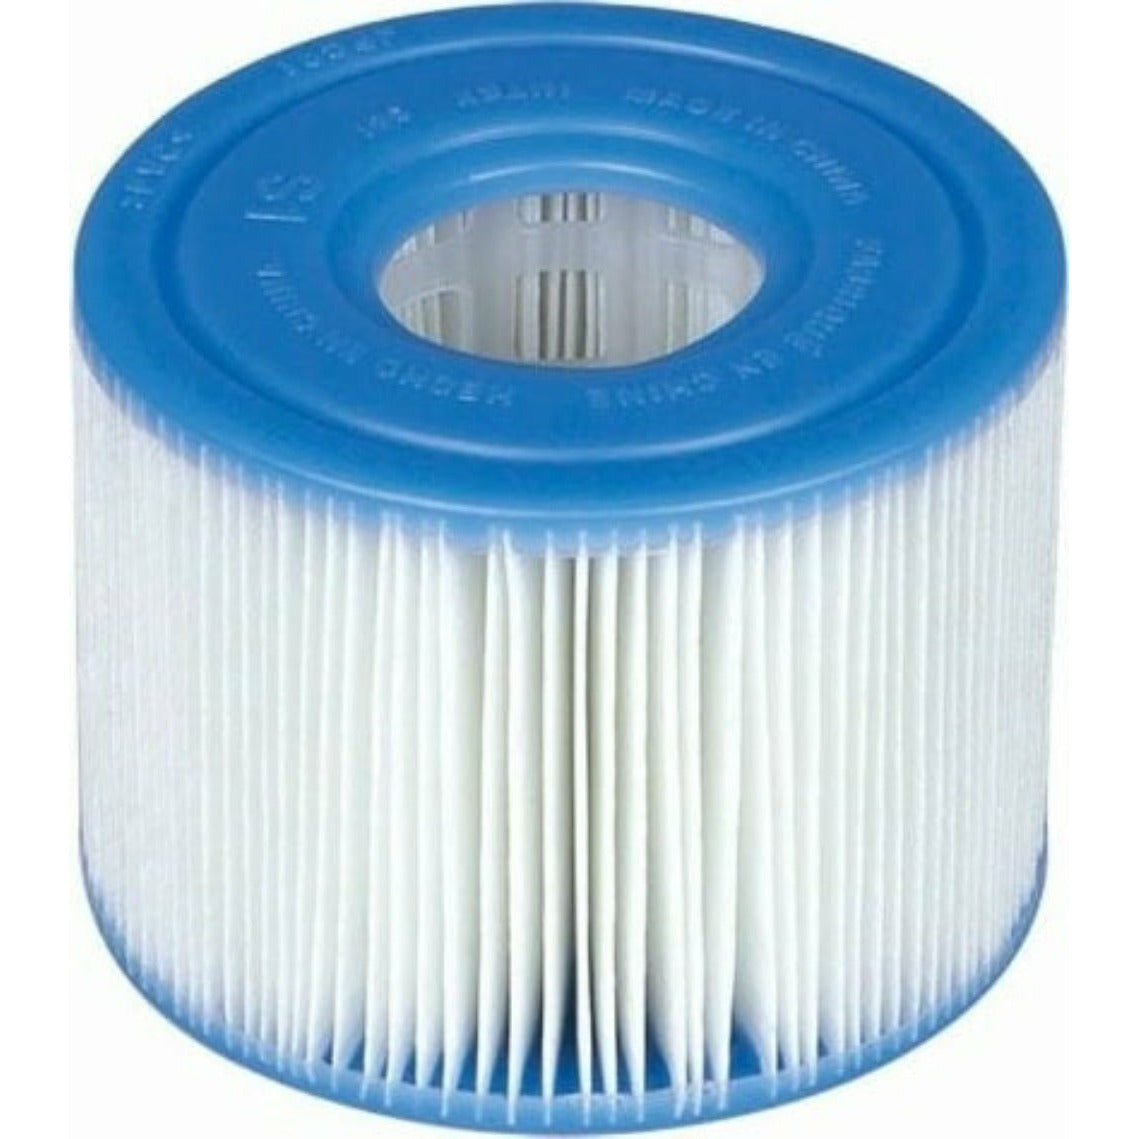 Intex Pure Spa S1 Filter - Type S1